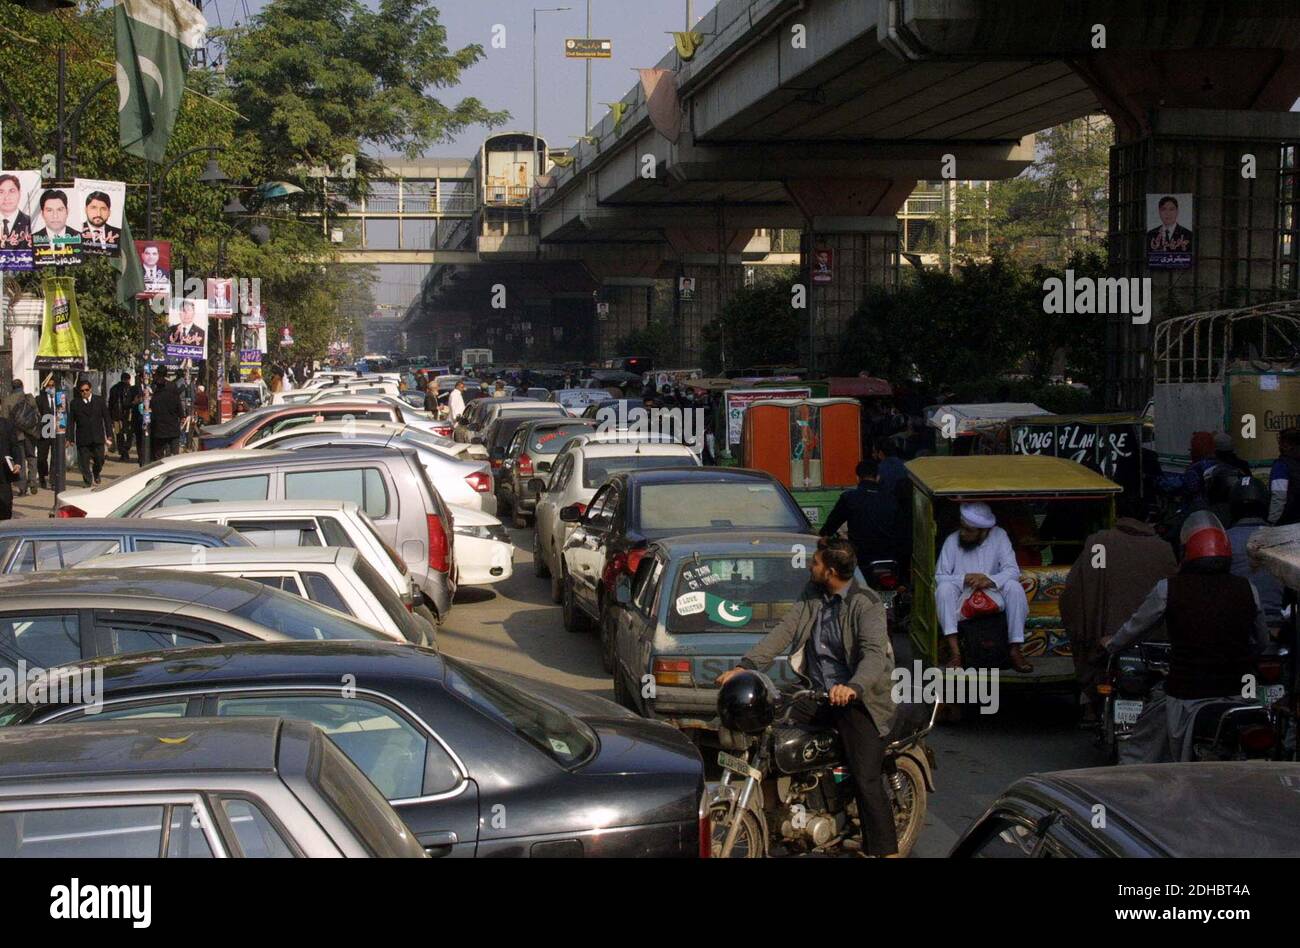 A large numbers of vehicles stuck in traffic jam due to negligence of traffic police staffs and illegal parking, at Aiwan-e-Adal road in Lahore on Thursday, December 10, 2020. Stock Photo